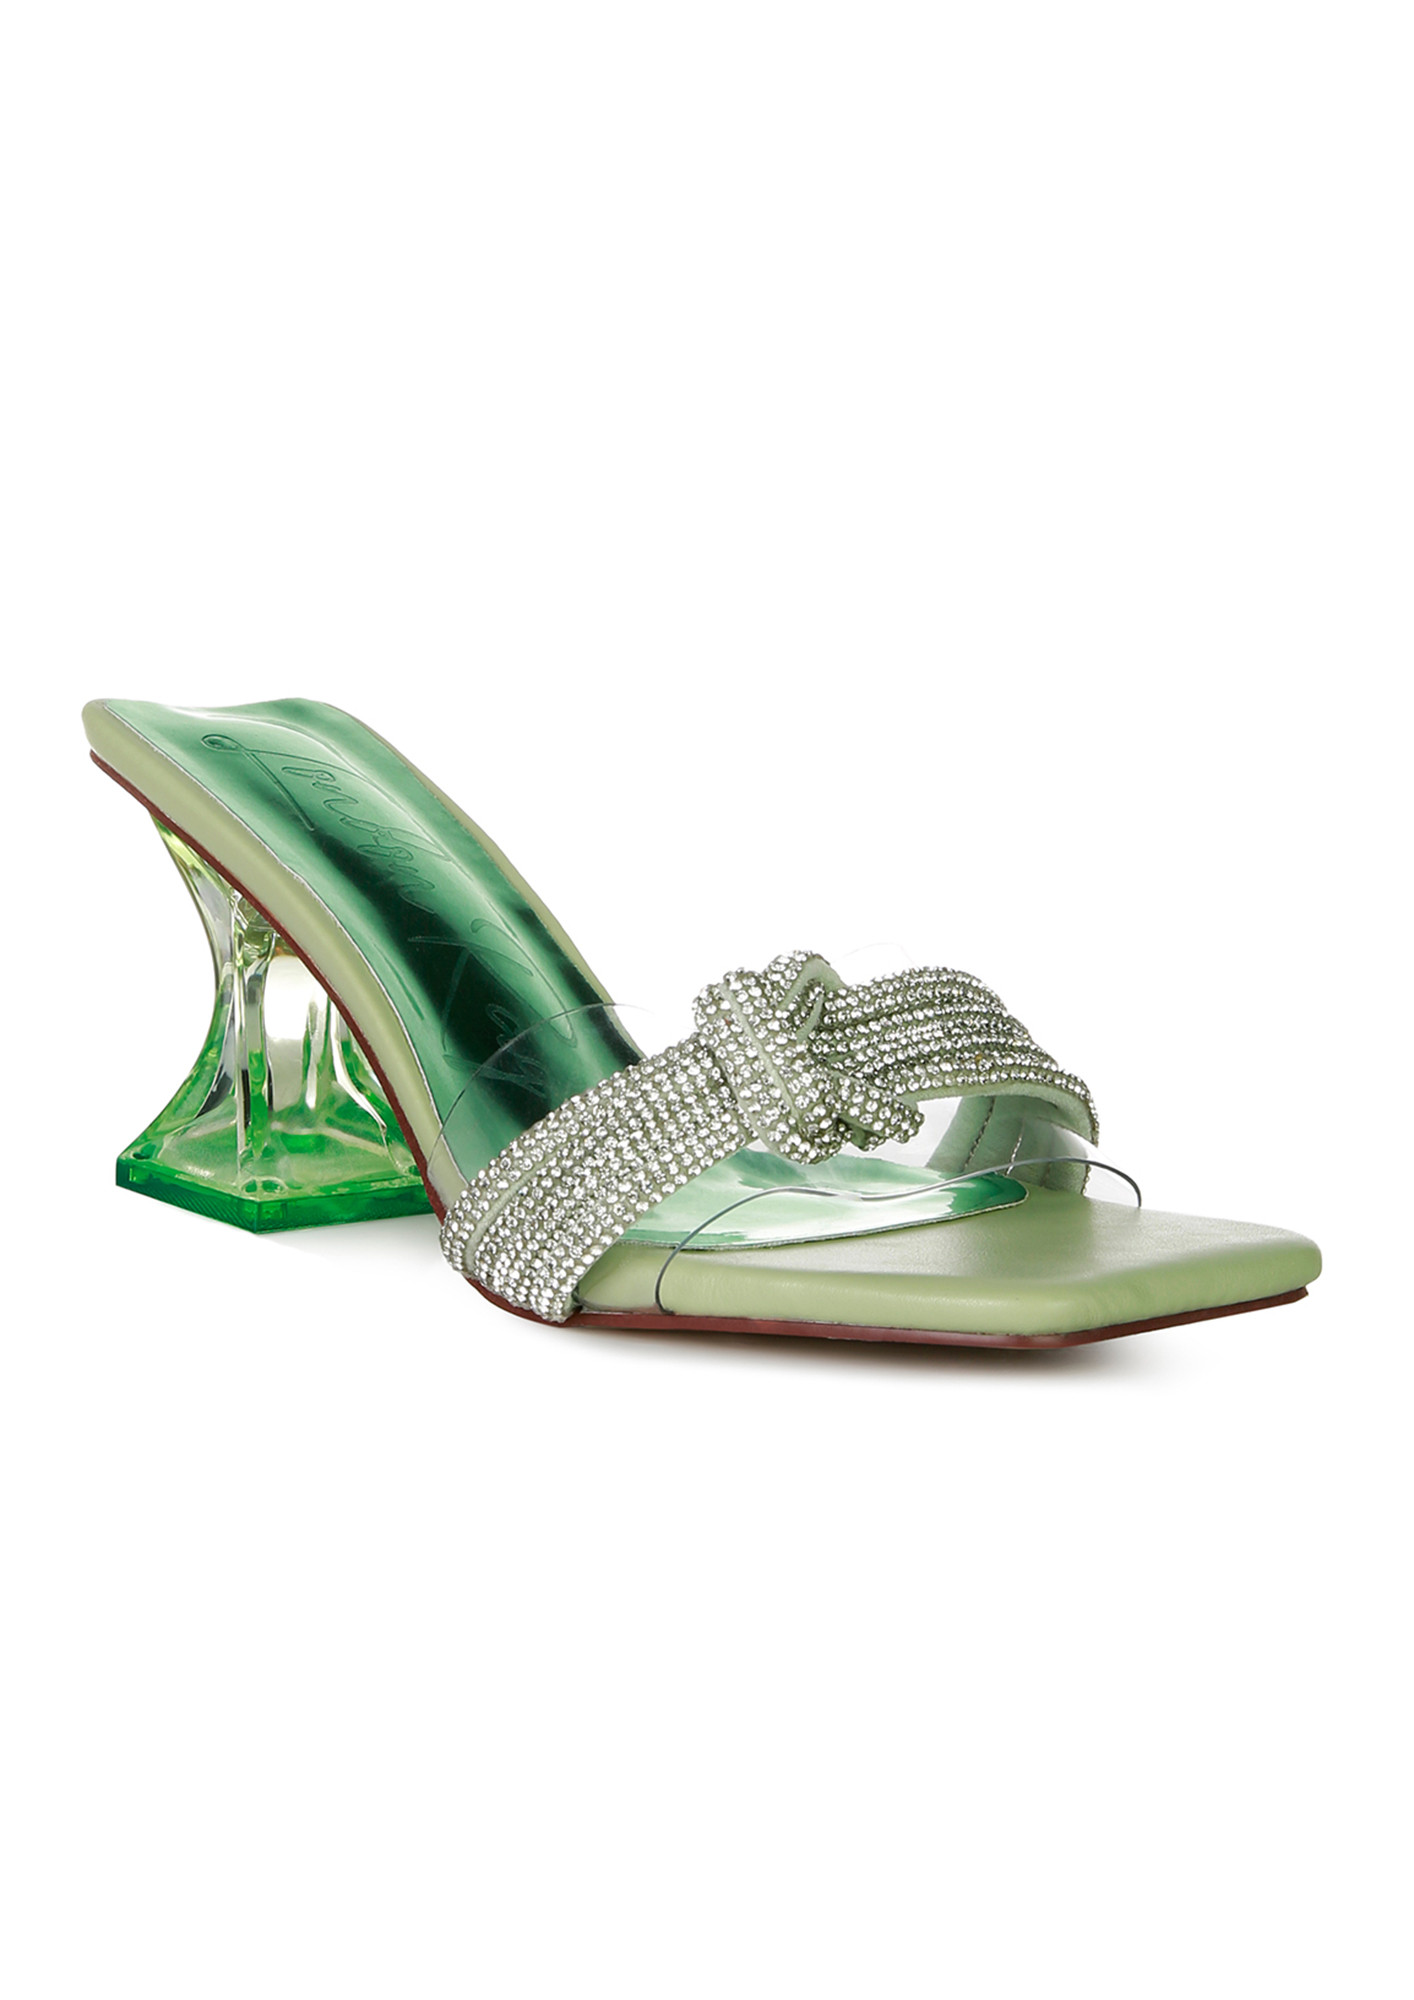 Green Knotted Diamante Strap Spool Heel Sandals